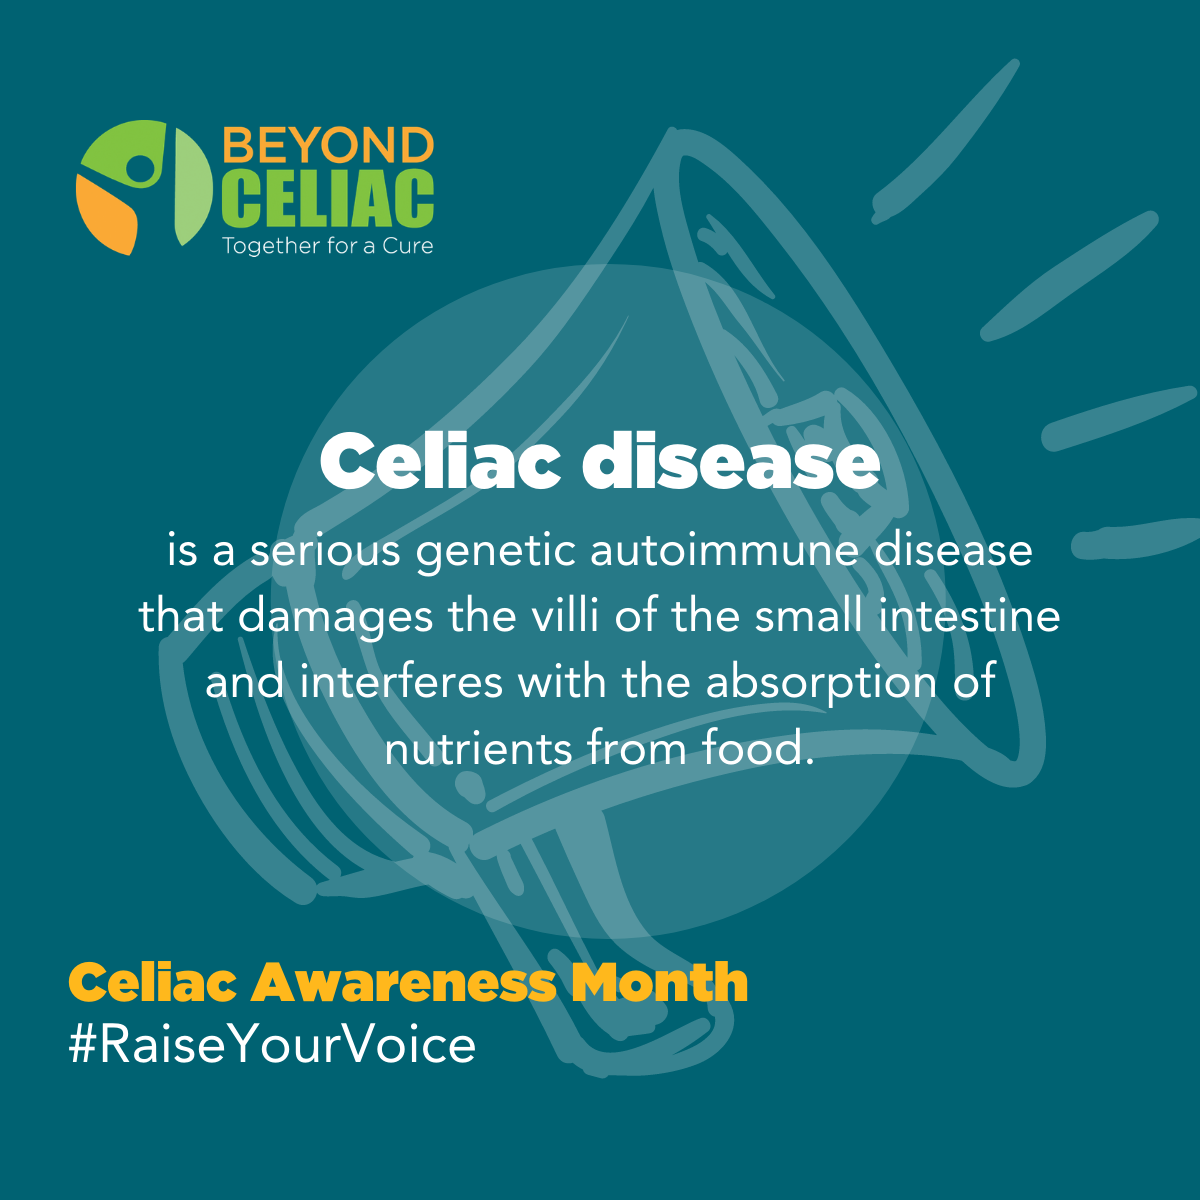 Through its comprehensive science strategy, Beyond Celiac accelerates the science of celiac disease by awarding research grants, recruiting patients for clinical trials and partnering with pharmaceutical, health and biotech companies and organizations to enhance the shared goals of driving treatments and a cure. For Celiac Awareness Month, Beyond Celiac is inviting the celiac disease community to raise its voice to educate others about this serious genetic autoimmune disease.  Information, sharable content and more are available at www.beyondceliac.org/celiac-awareness-month